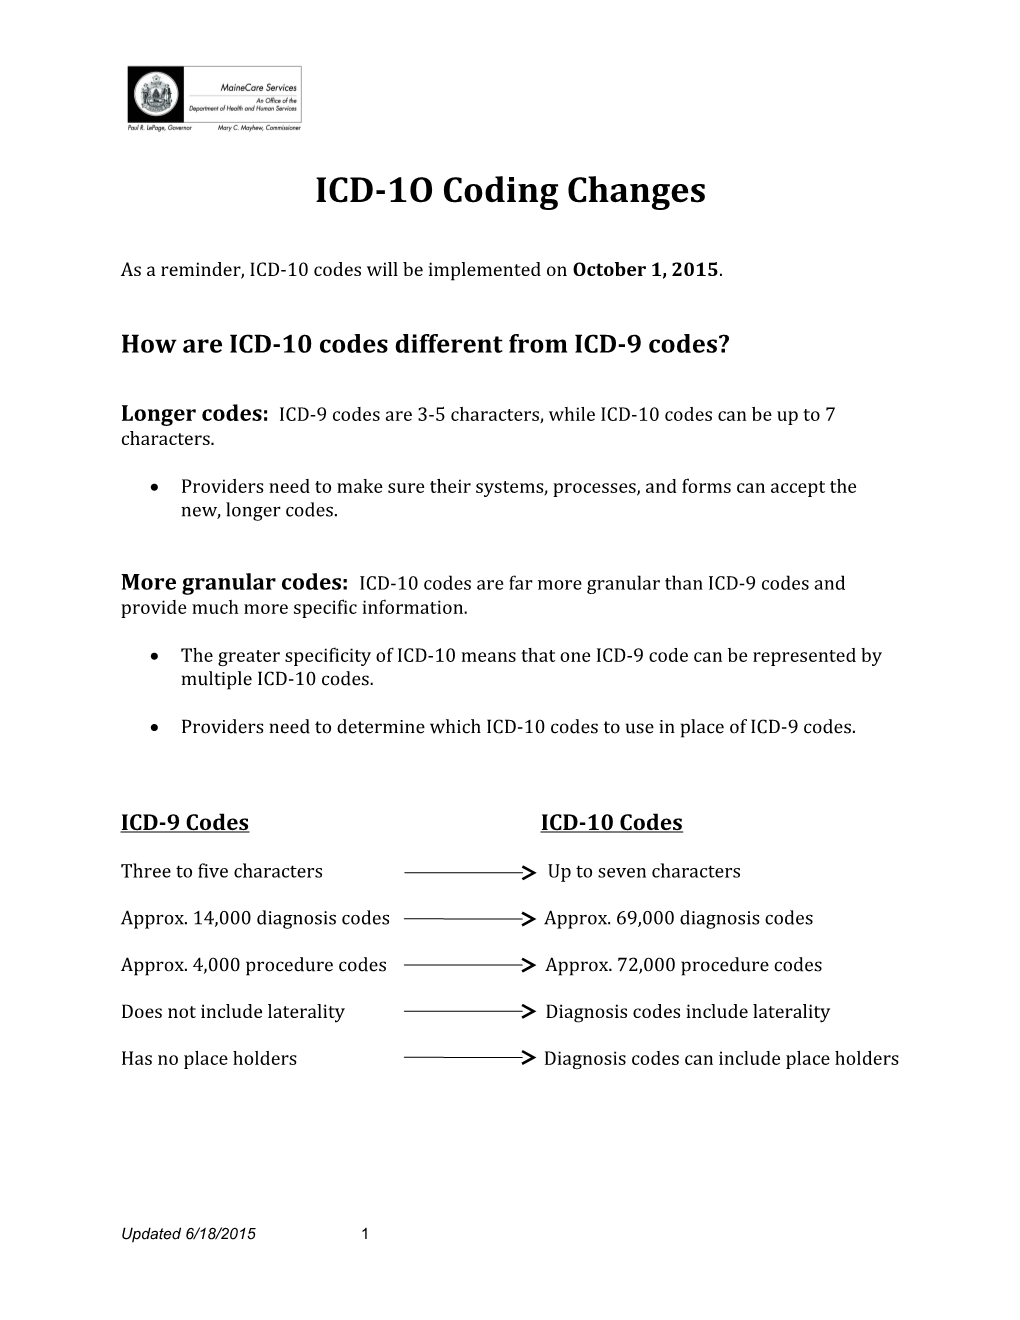 How Are ICD-10 Codes Different from ICD-9 Codes?